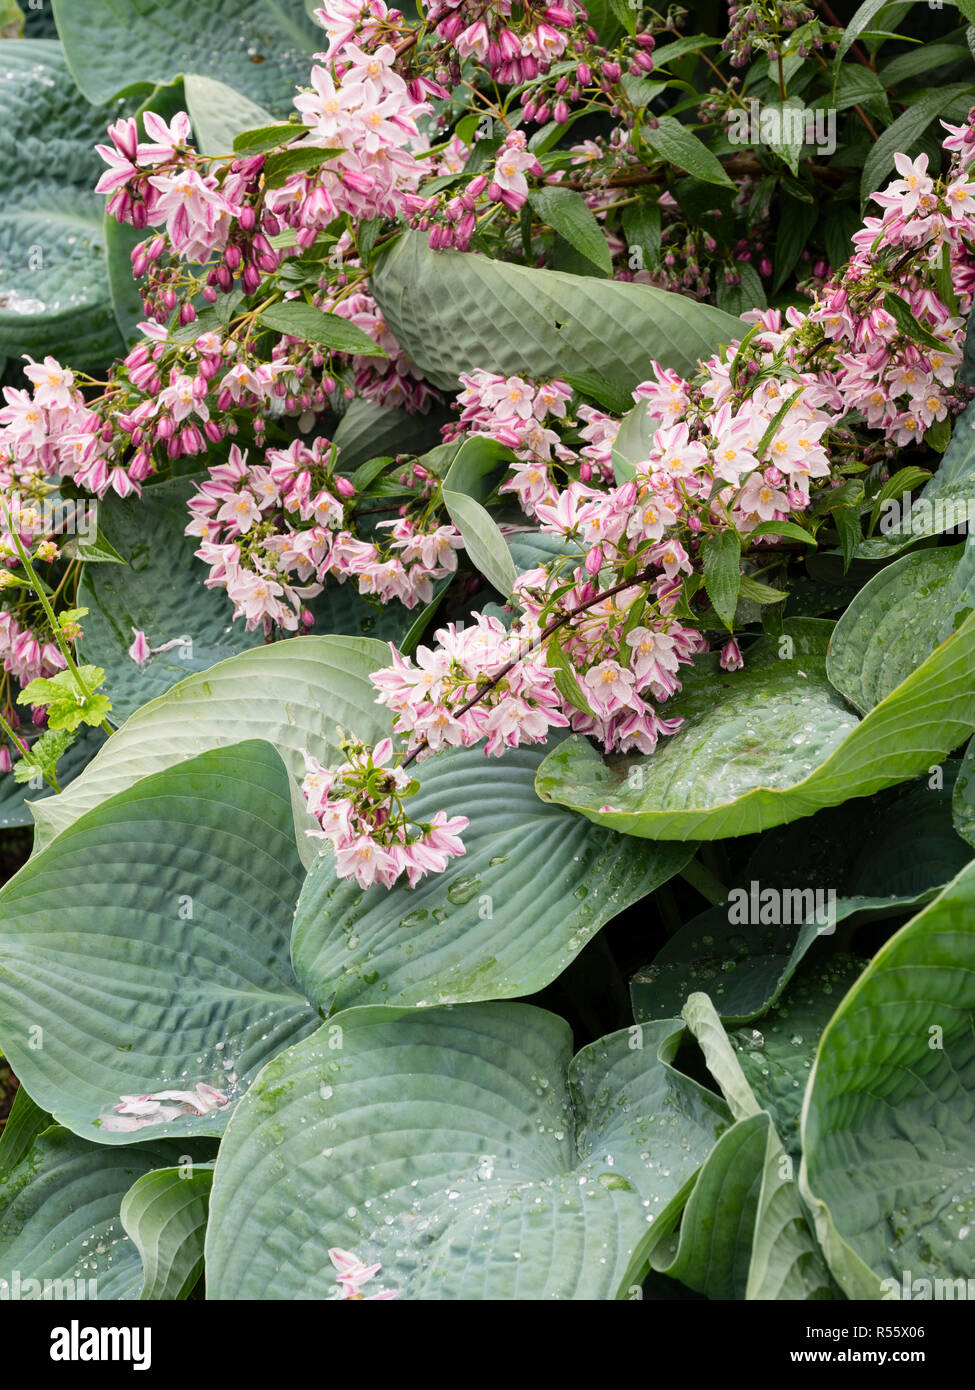 Large blue grey leaves of Hosta 'Abiqua Drinking Gourd' contrast with the pink and white flowers of Deutzia 'Iris Alford' in early summer display Stock Photo